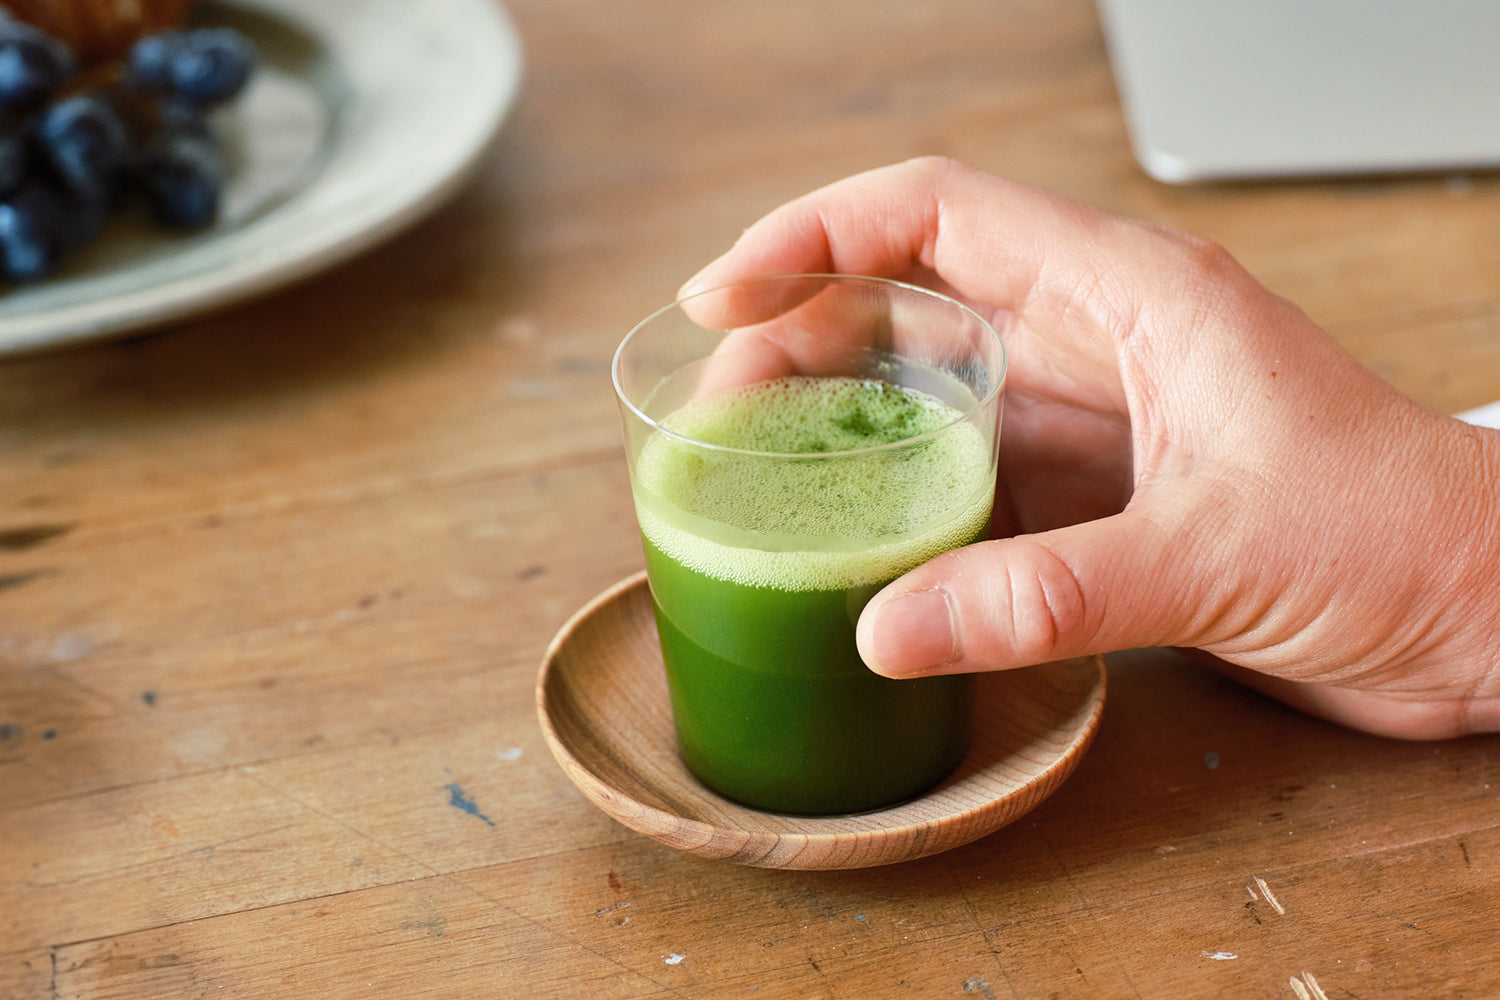 A person’s hand rested on a wooden saucer and shot glass of bright green matcha.